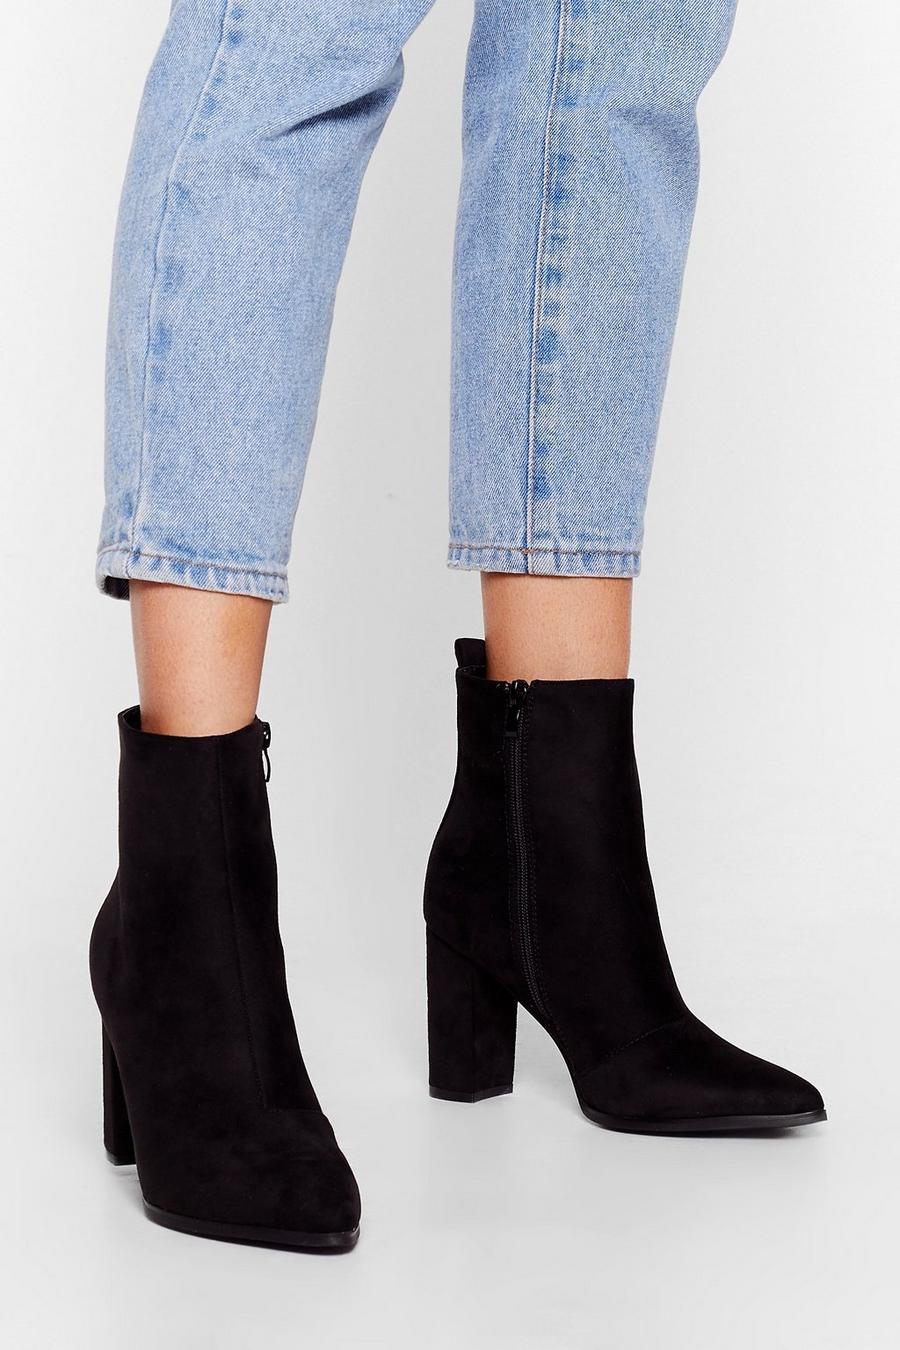 We Faux Suede It Heeled Ankle Boots